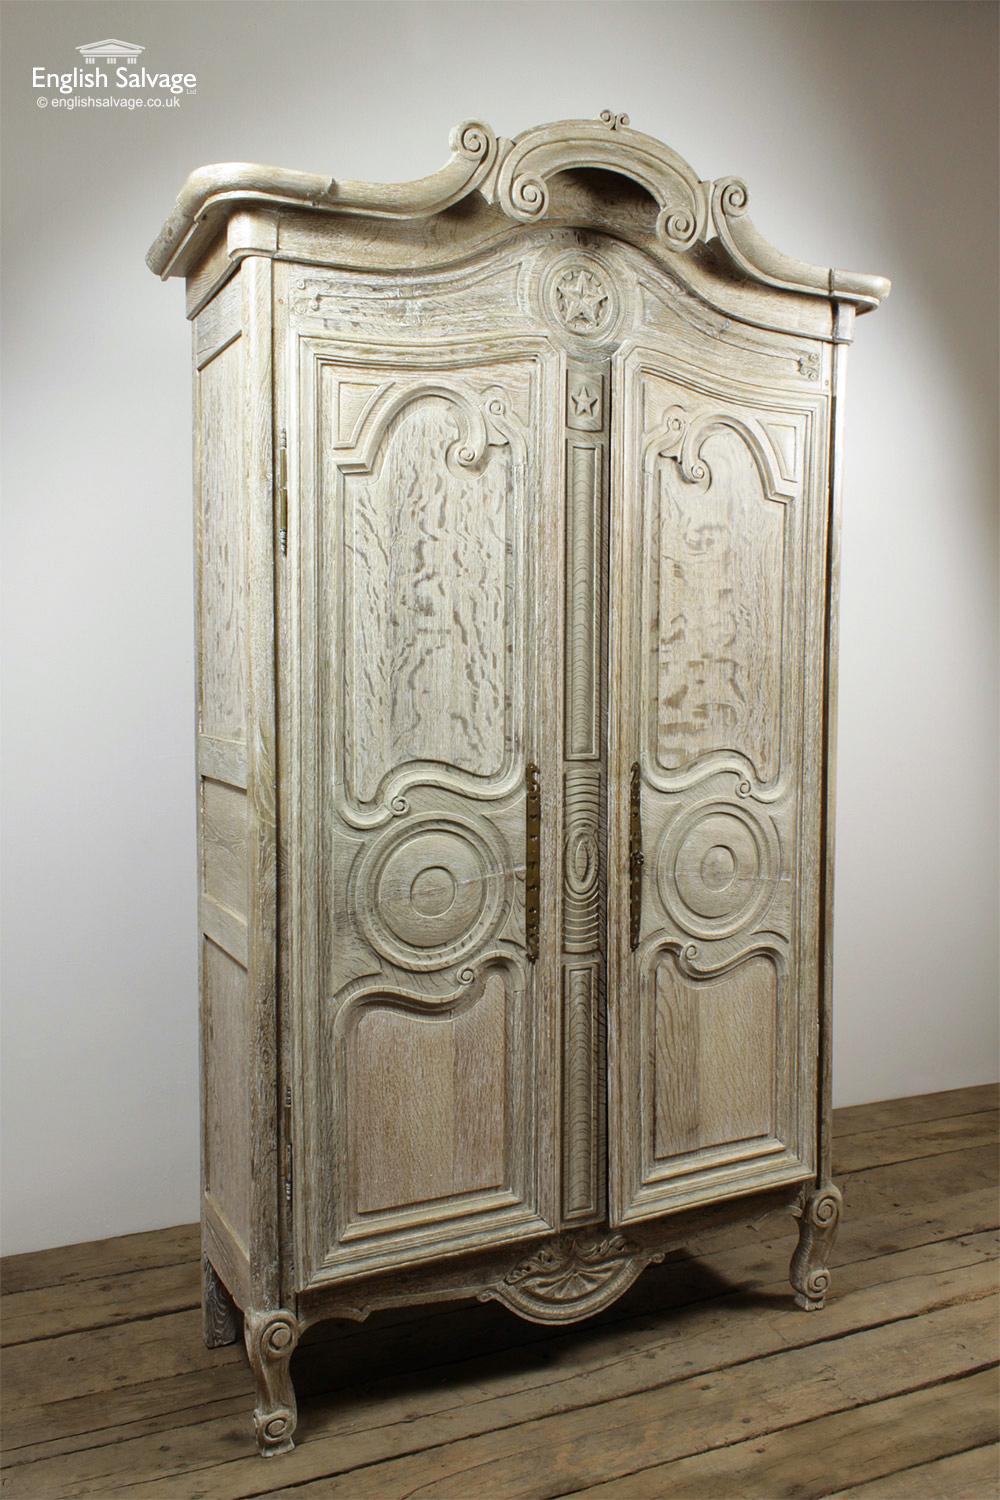 Antique, ornate oak armoire, wardrobe, cupboard decorated with scrolls and stars, complete with attractive thin brass fingerplates. Width at top of unit 147.5cm, main body width 130.2cm.

Few splits, signs of old worm to the rear, one internal